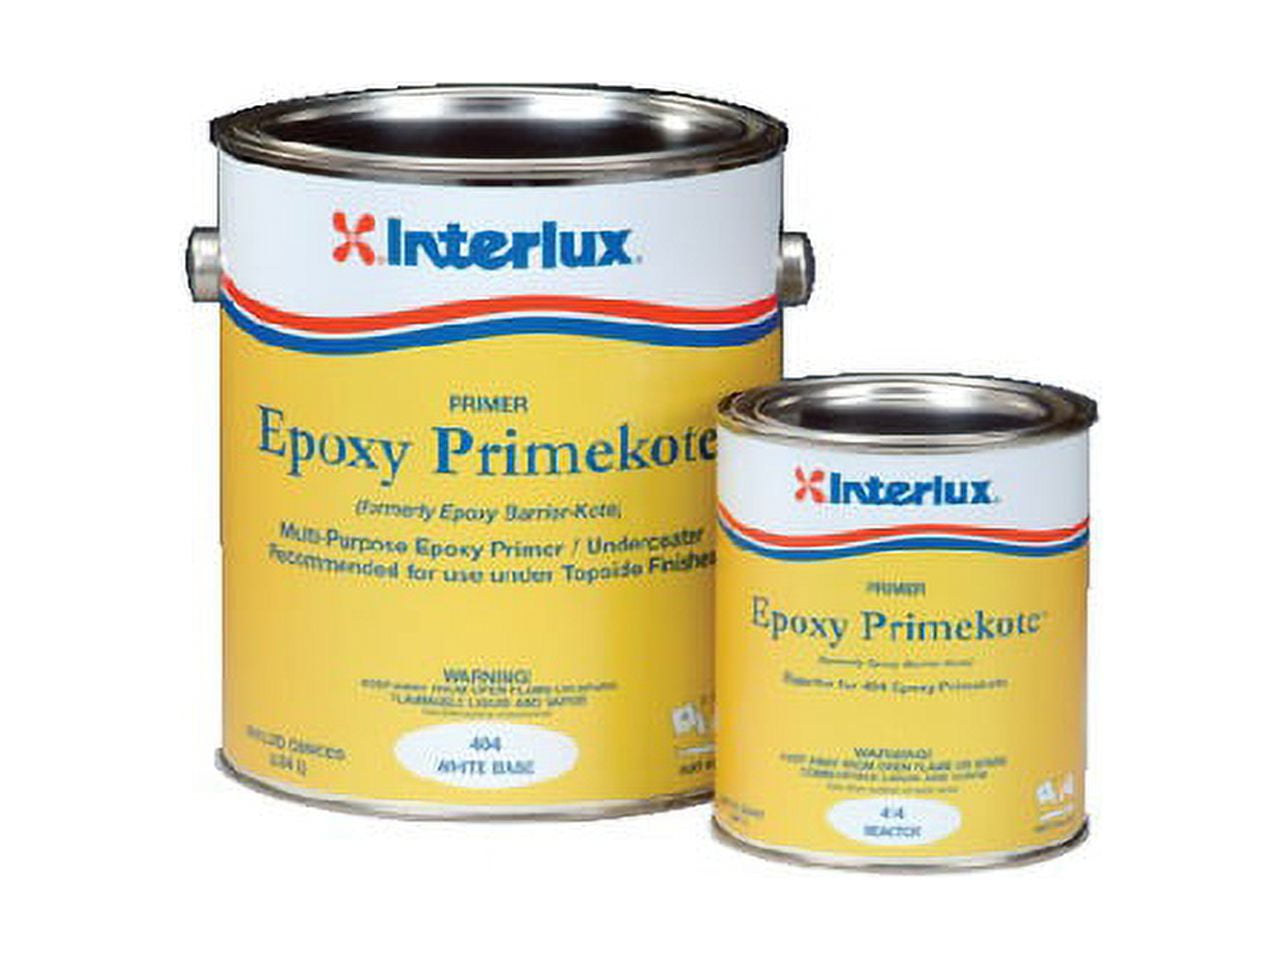 Ultimate Top Coat Epoxy (Natural Matte Finish) DIY Epoxy Resin Kit with  Extra Scratch Resistance and UV Resistance for Protecting Your Surface!  (Stone Coat Countertops) 